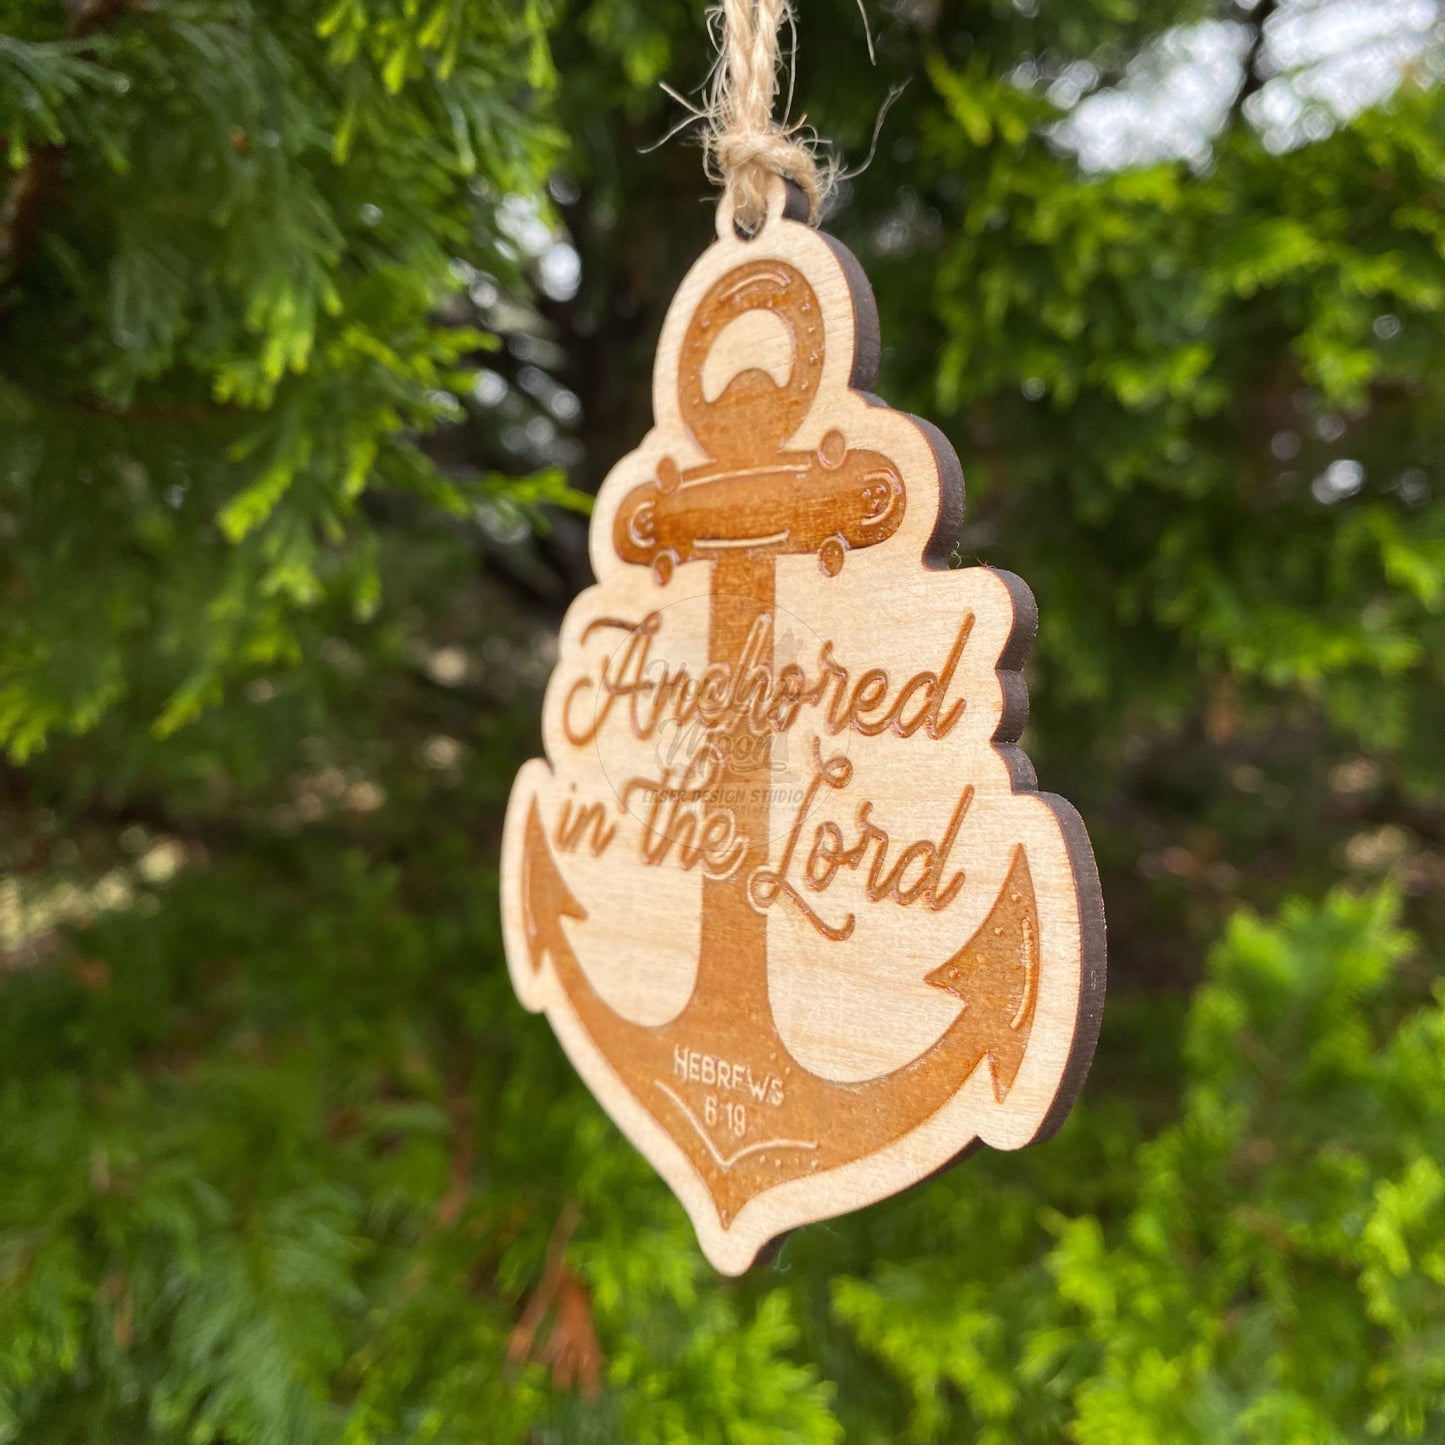 Anchored in the Lord Nautical Ornament, featuring verse Hebrews 6:19 is handcrafted by Howling Moon Laser Design in Virginia, USA